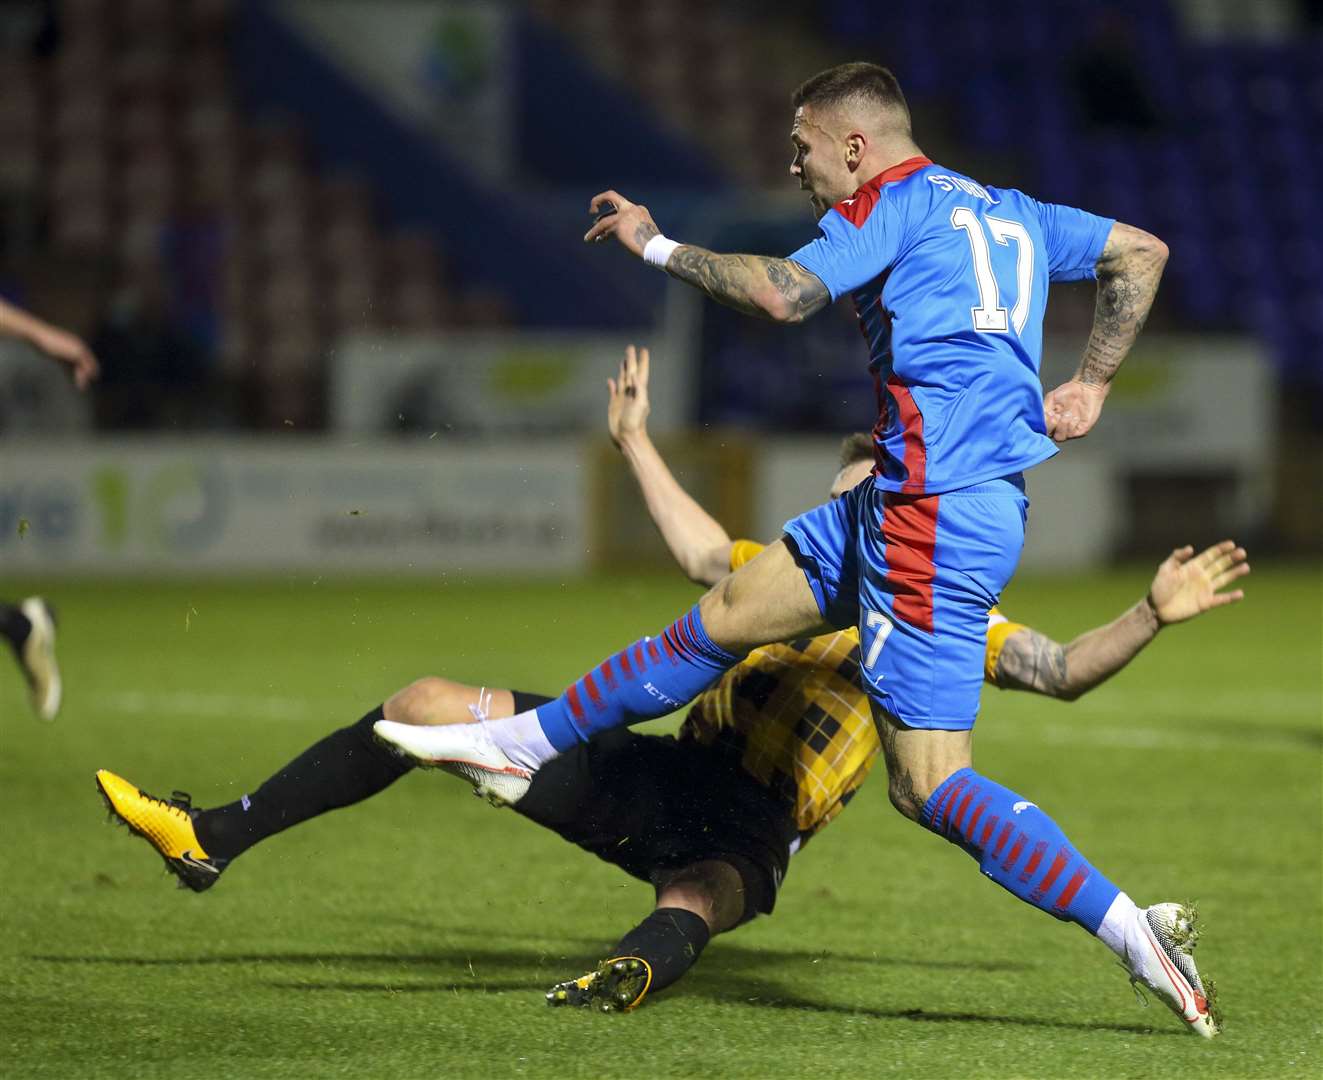 Picture - Ken Macpherson, Inverness. Betfred Cup Group stage. Inverness CT(1) v East Fife(0). 14.11.20. ICT’s Miles Storey sees his shot saved by East Fife ‘keeper Jordan Hart.